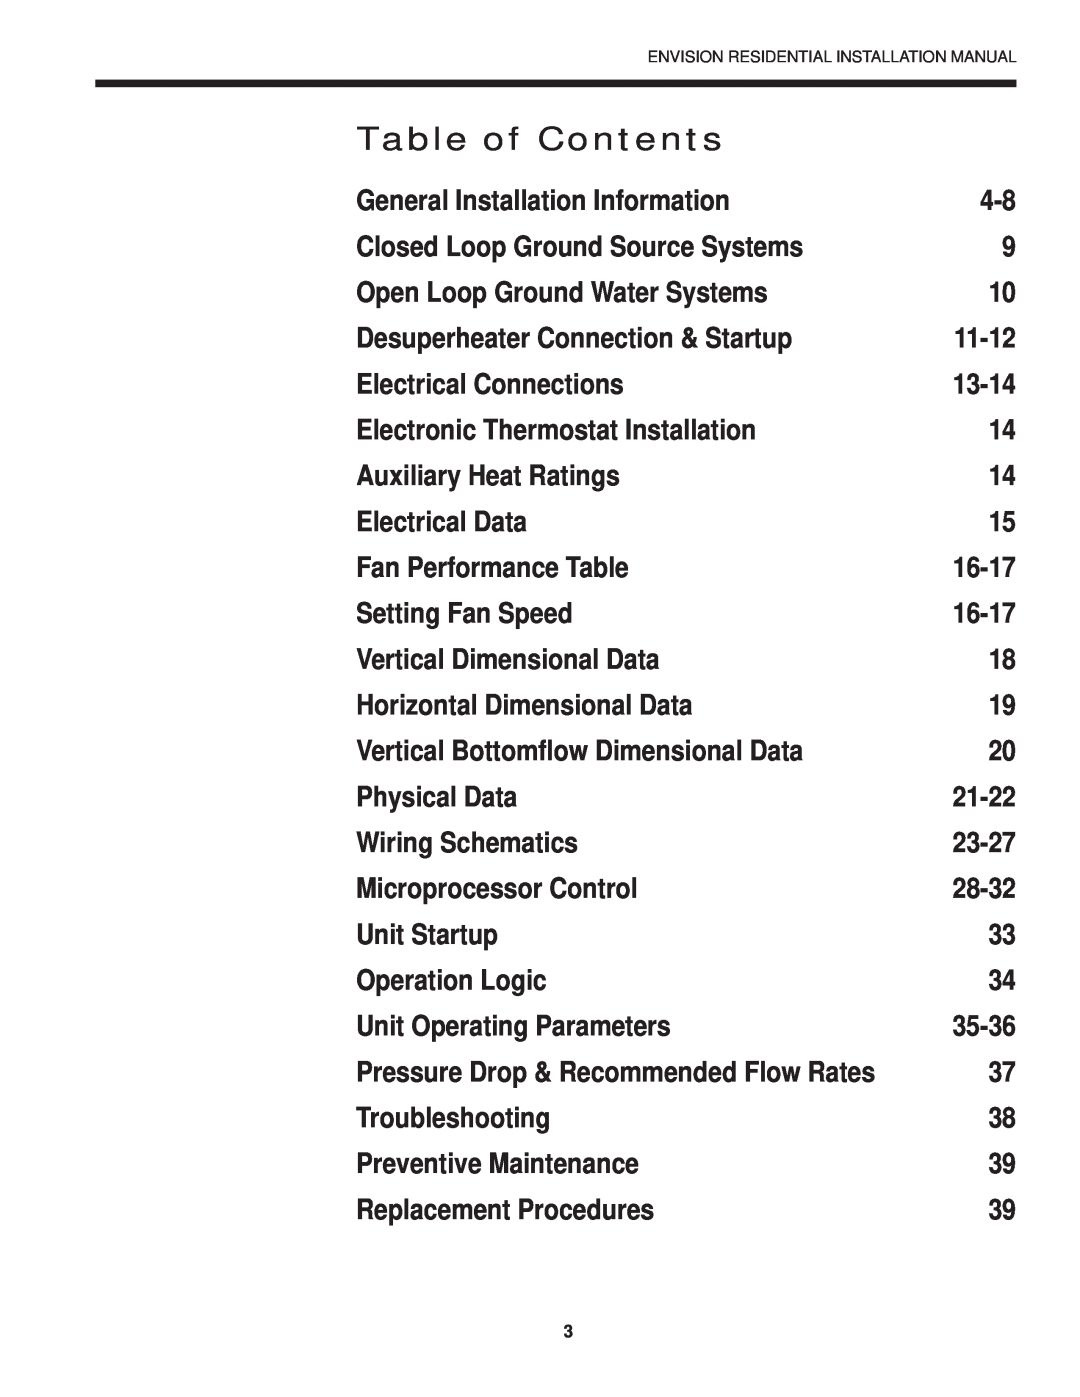 Envision Peripherals R-410A installation manual Table of Contents 